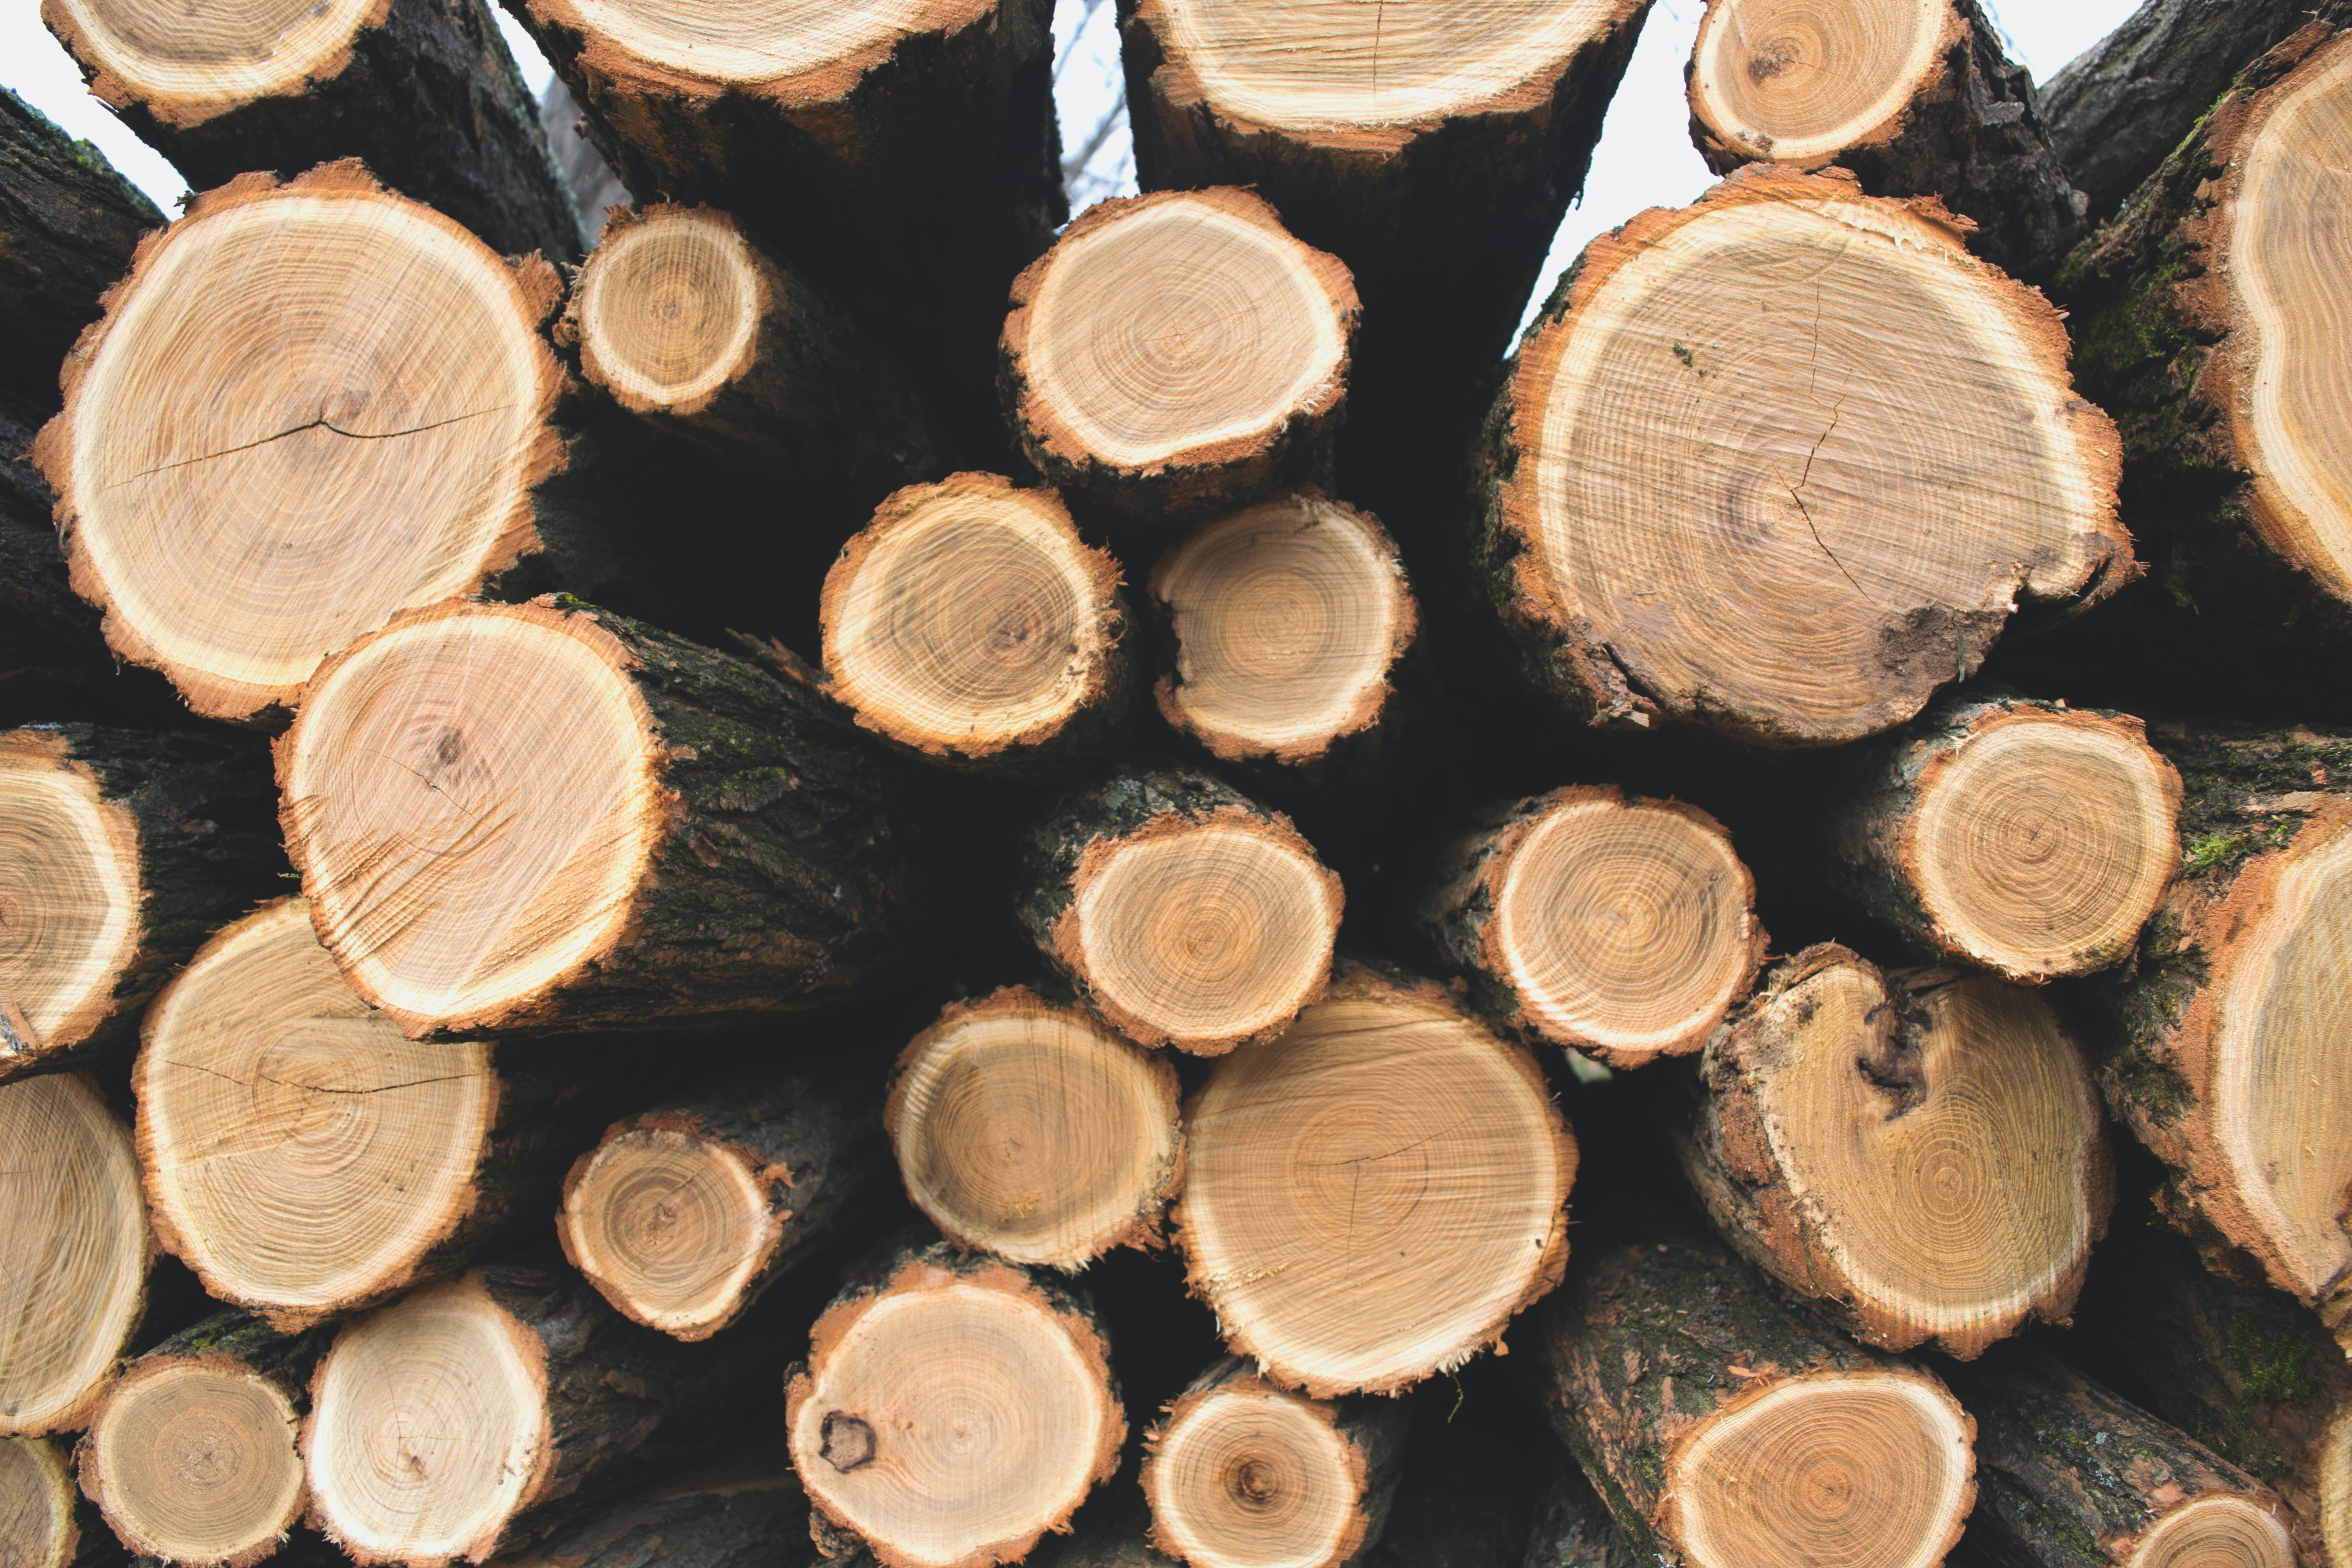 Wholesale of wood and products for the first-stage processing of wood in Estonia